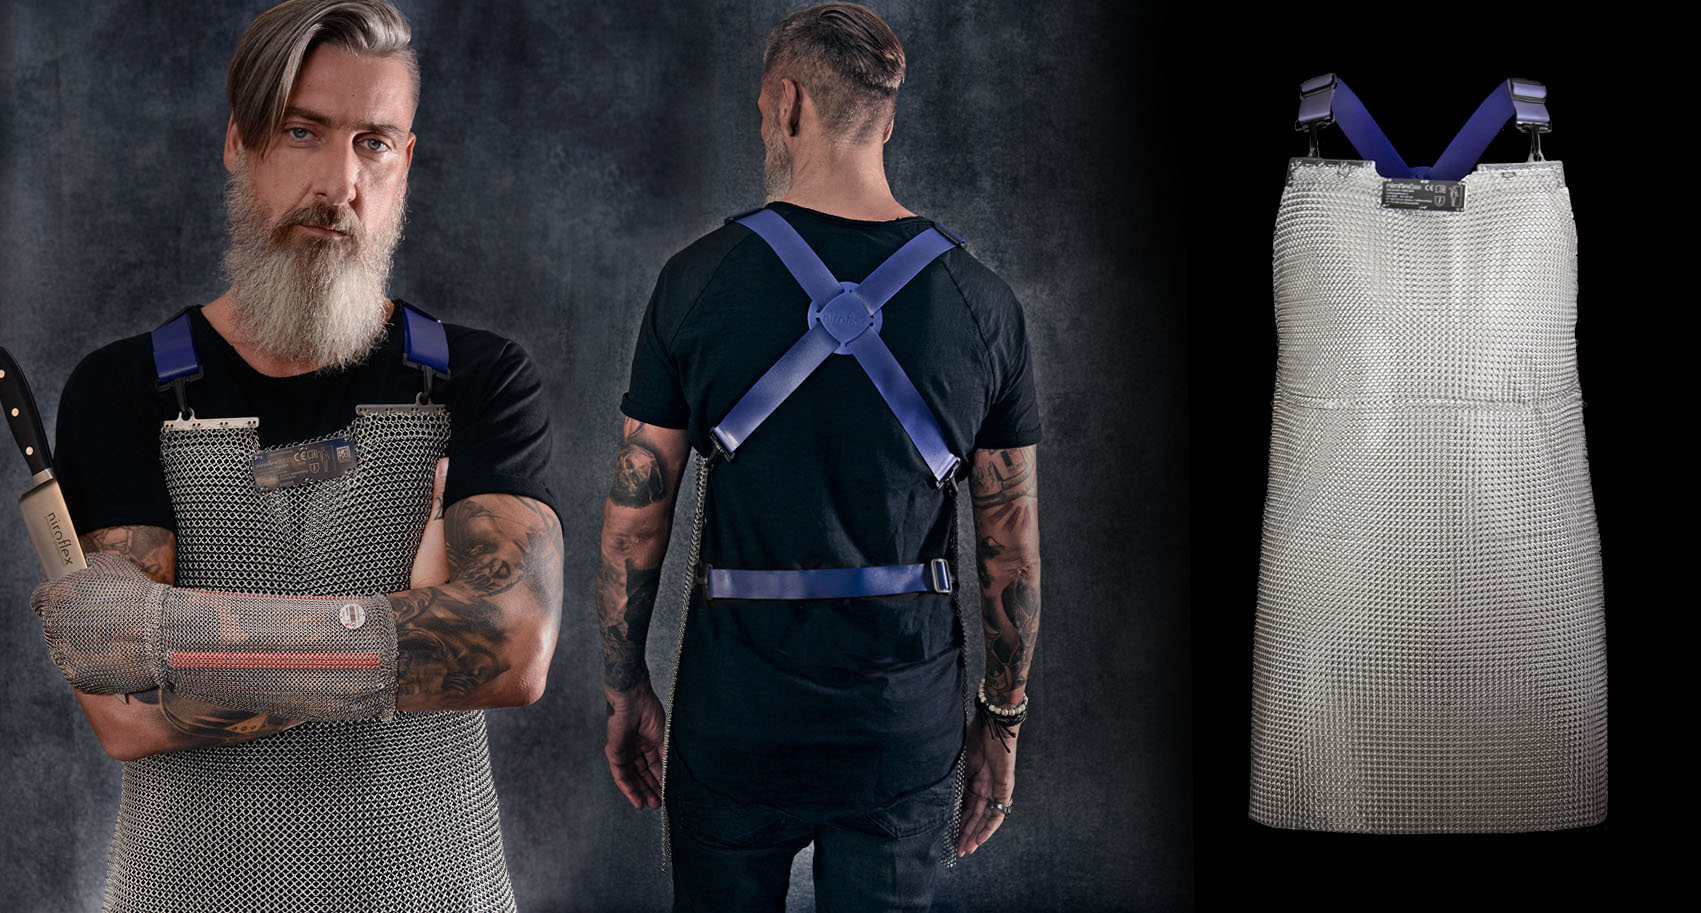 Chainmail aprons: Stainless Steel Chain Mail Cut Resistant Butcher Apron